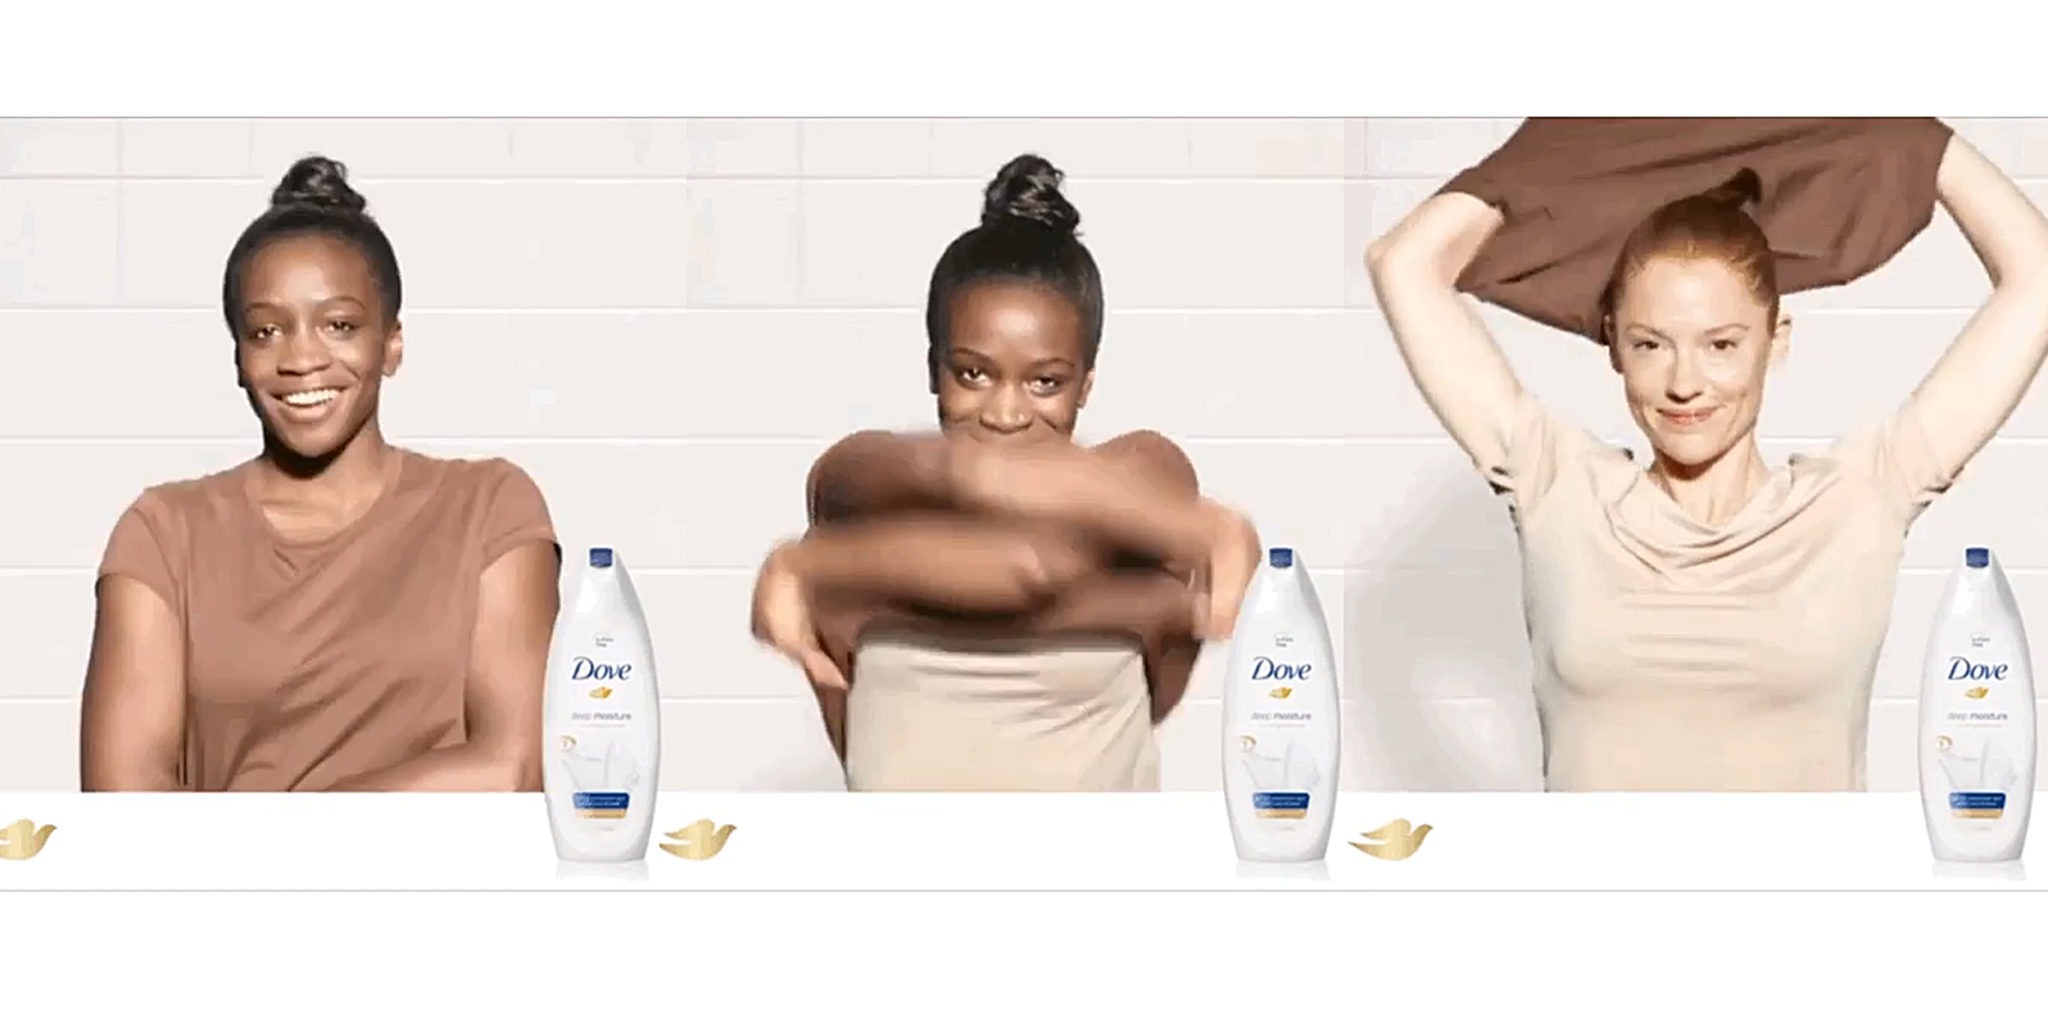 Dove Ad2 - marketing blunders 